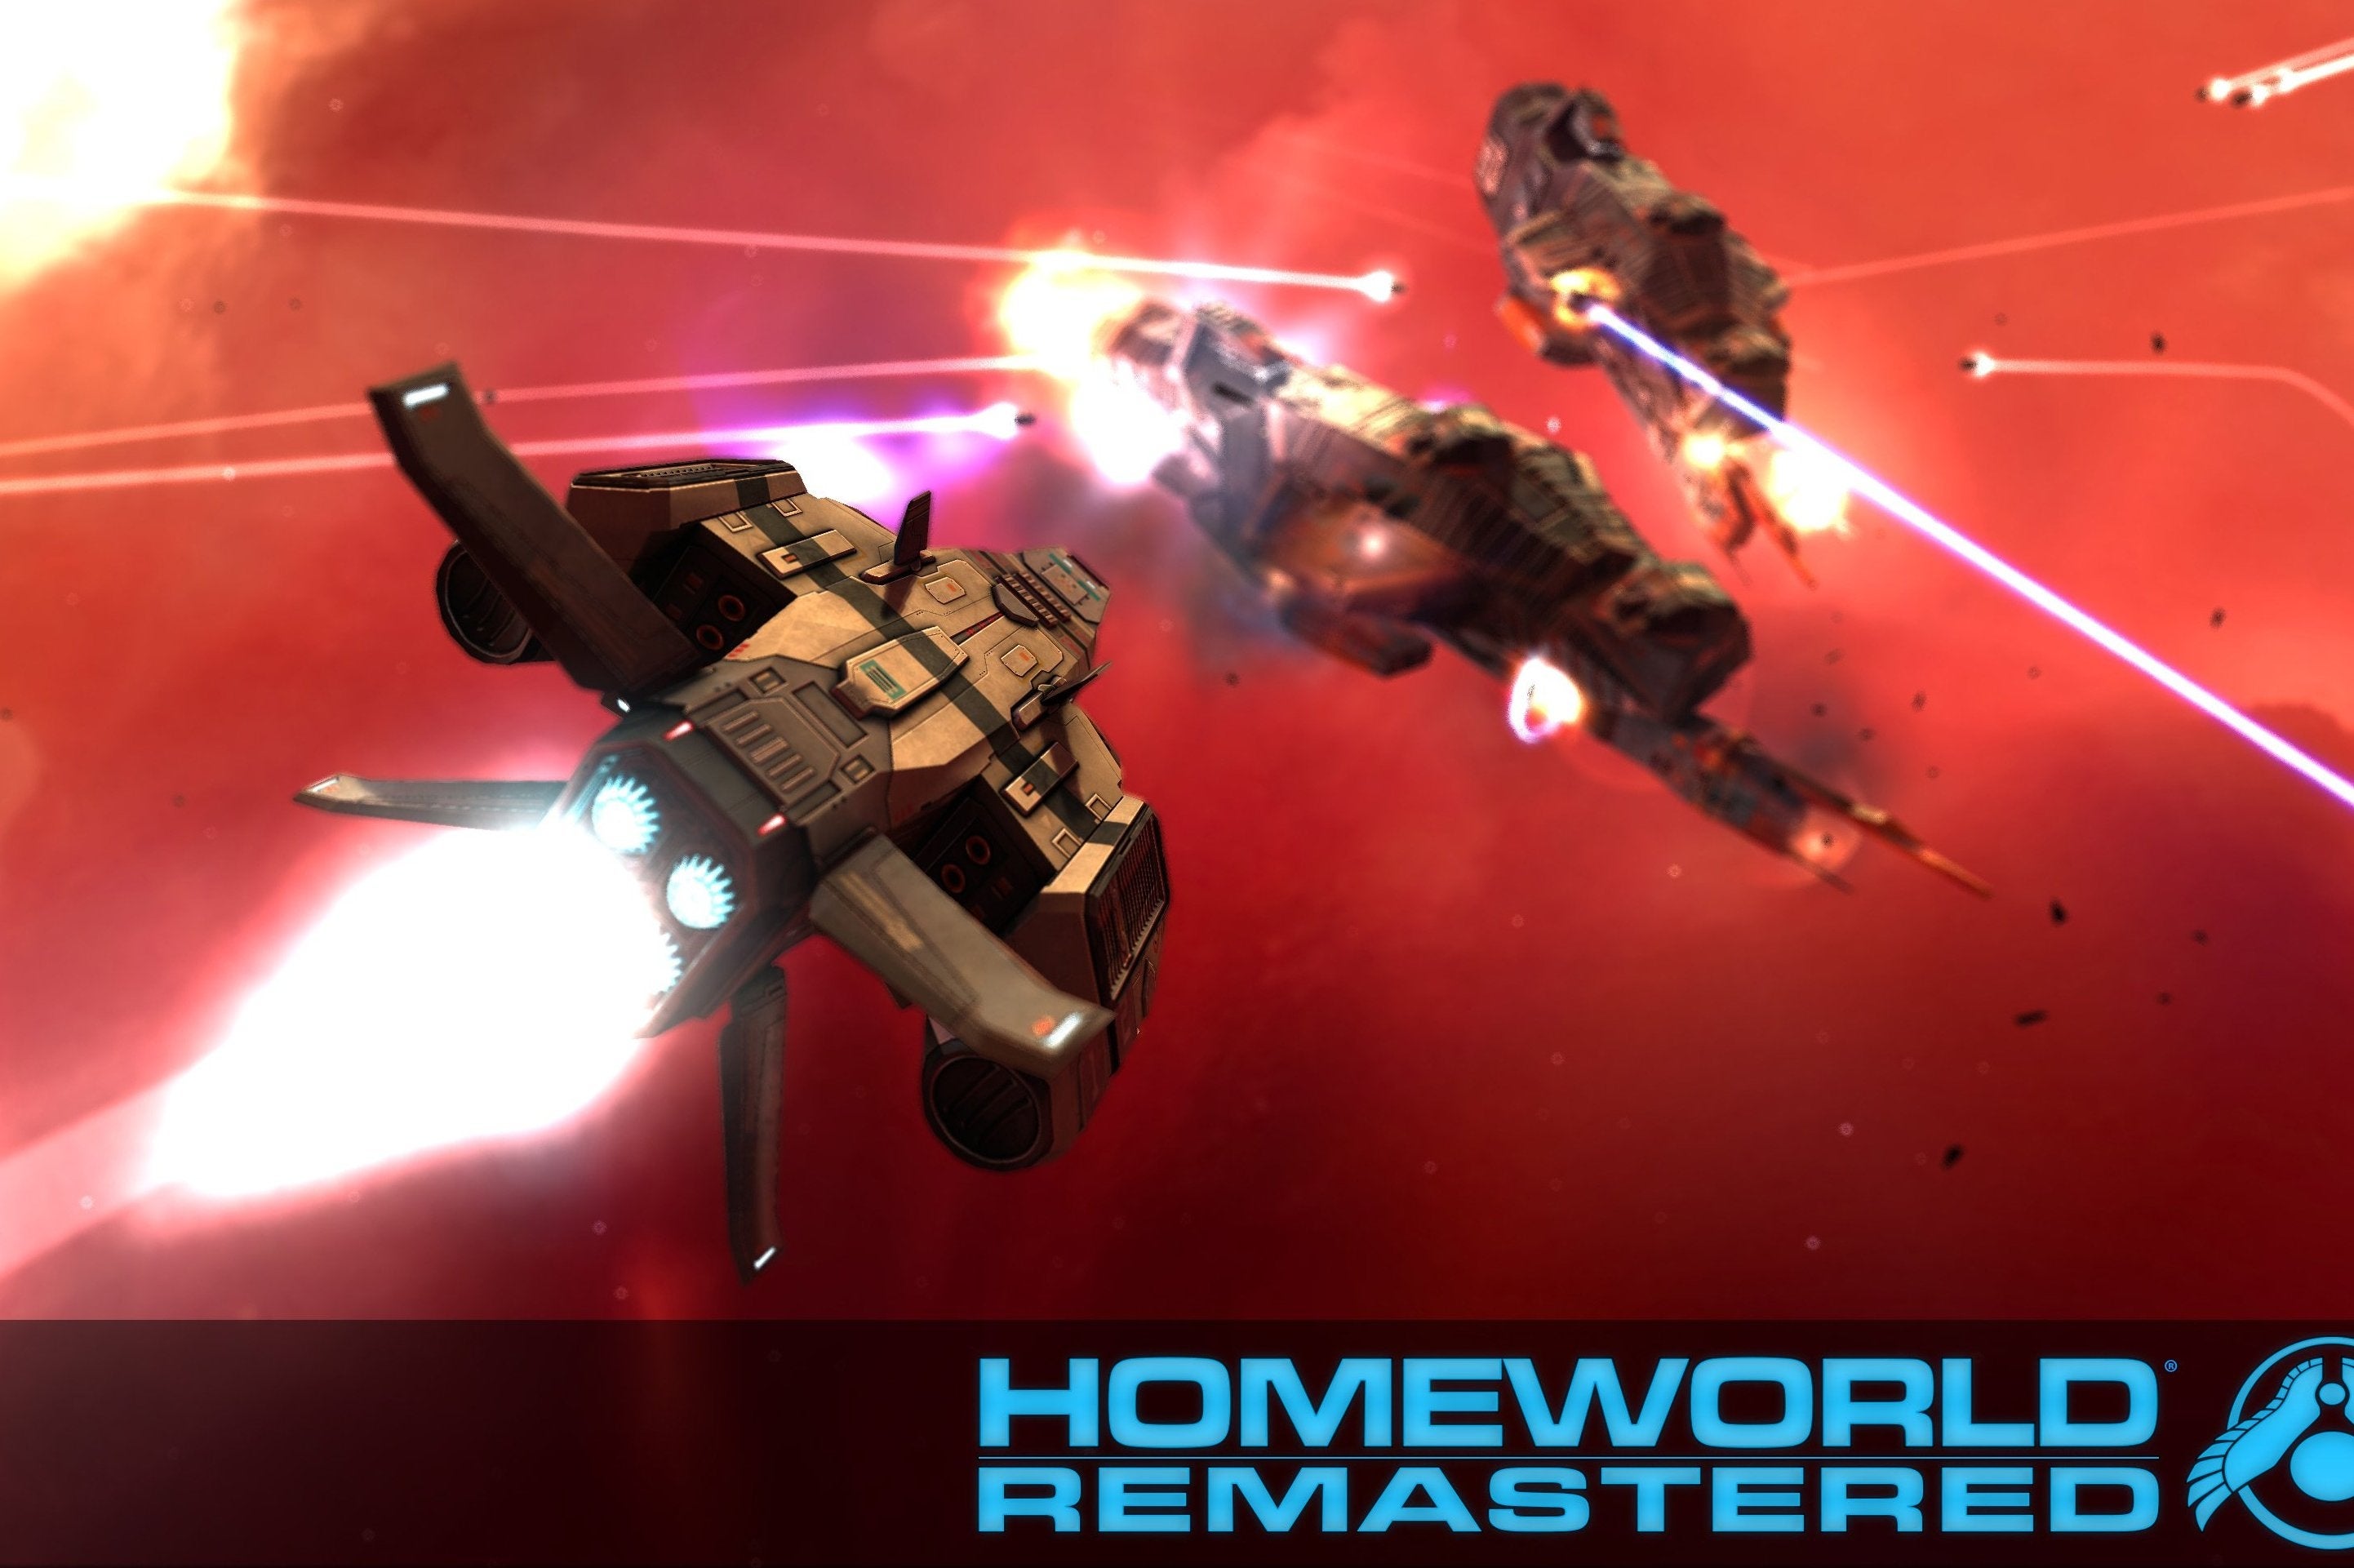 Image for First footage of Gearbox's Homeworld remake